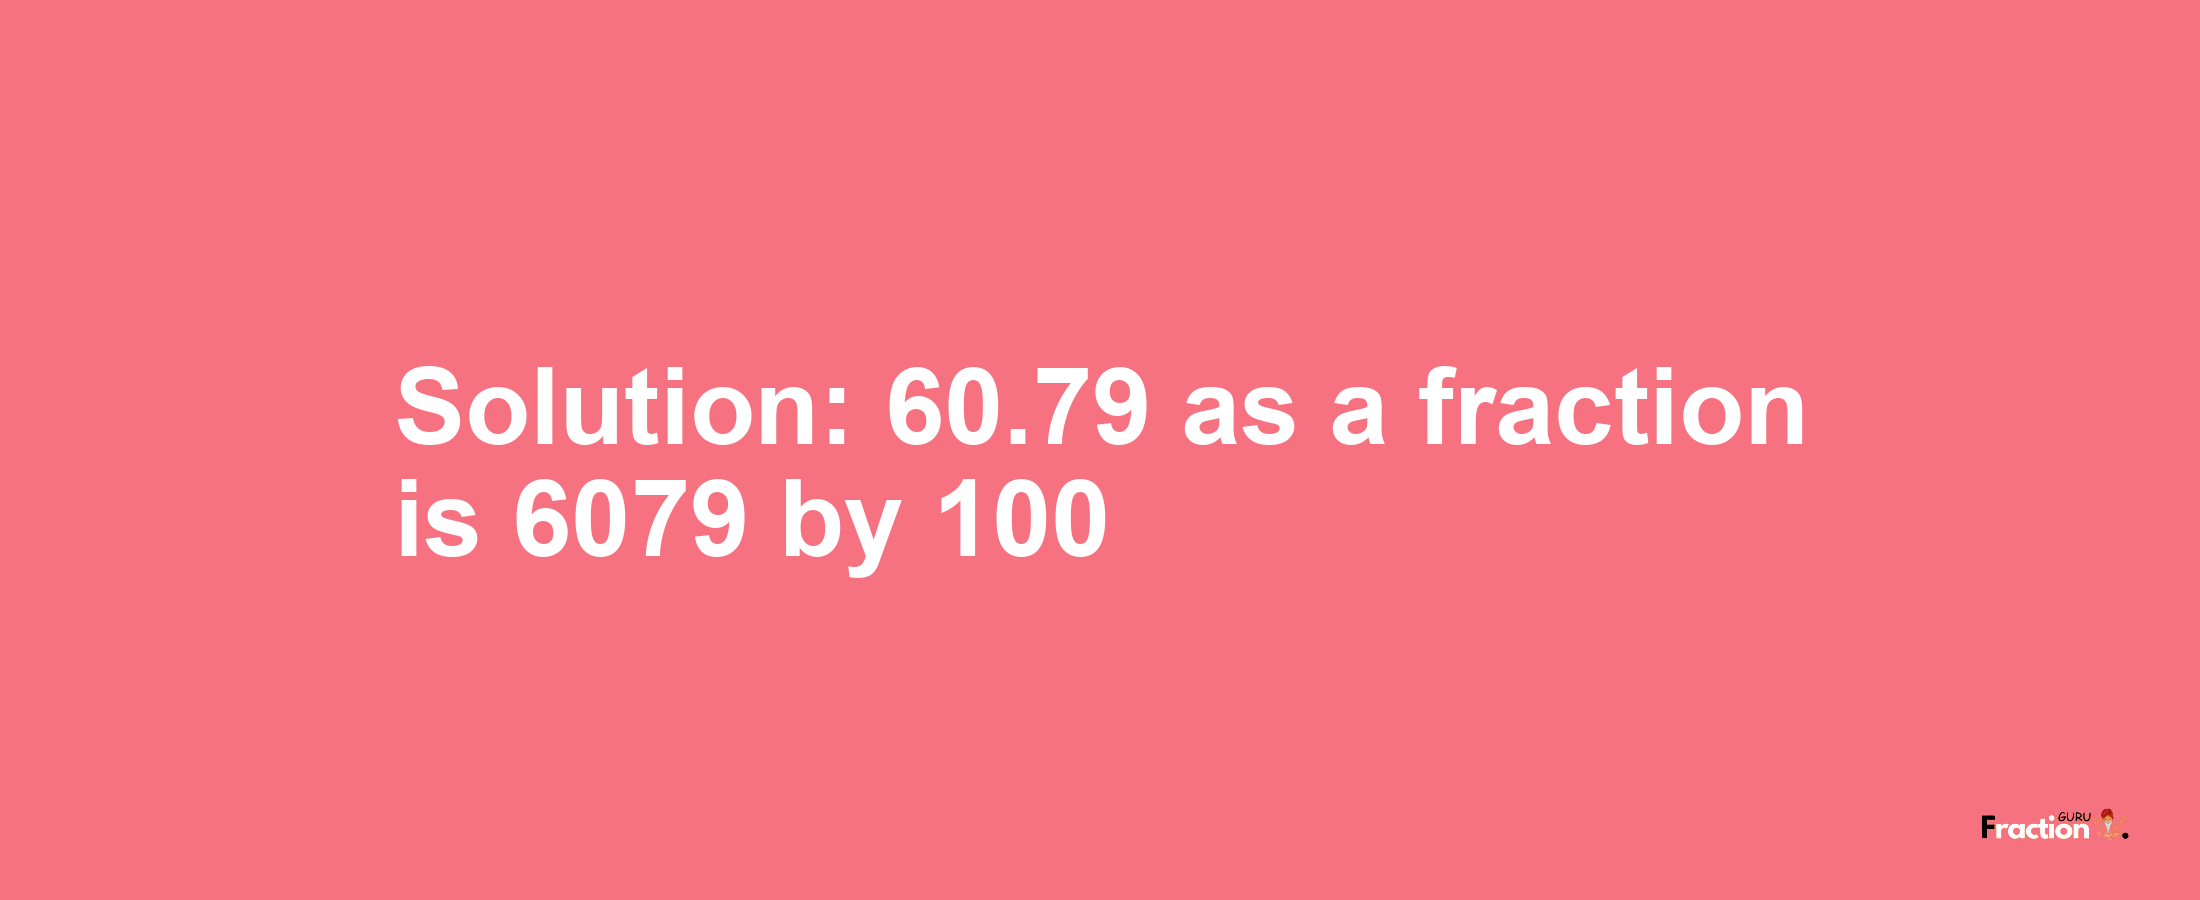 Solution:60.79 as a fraction is 6079/100